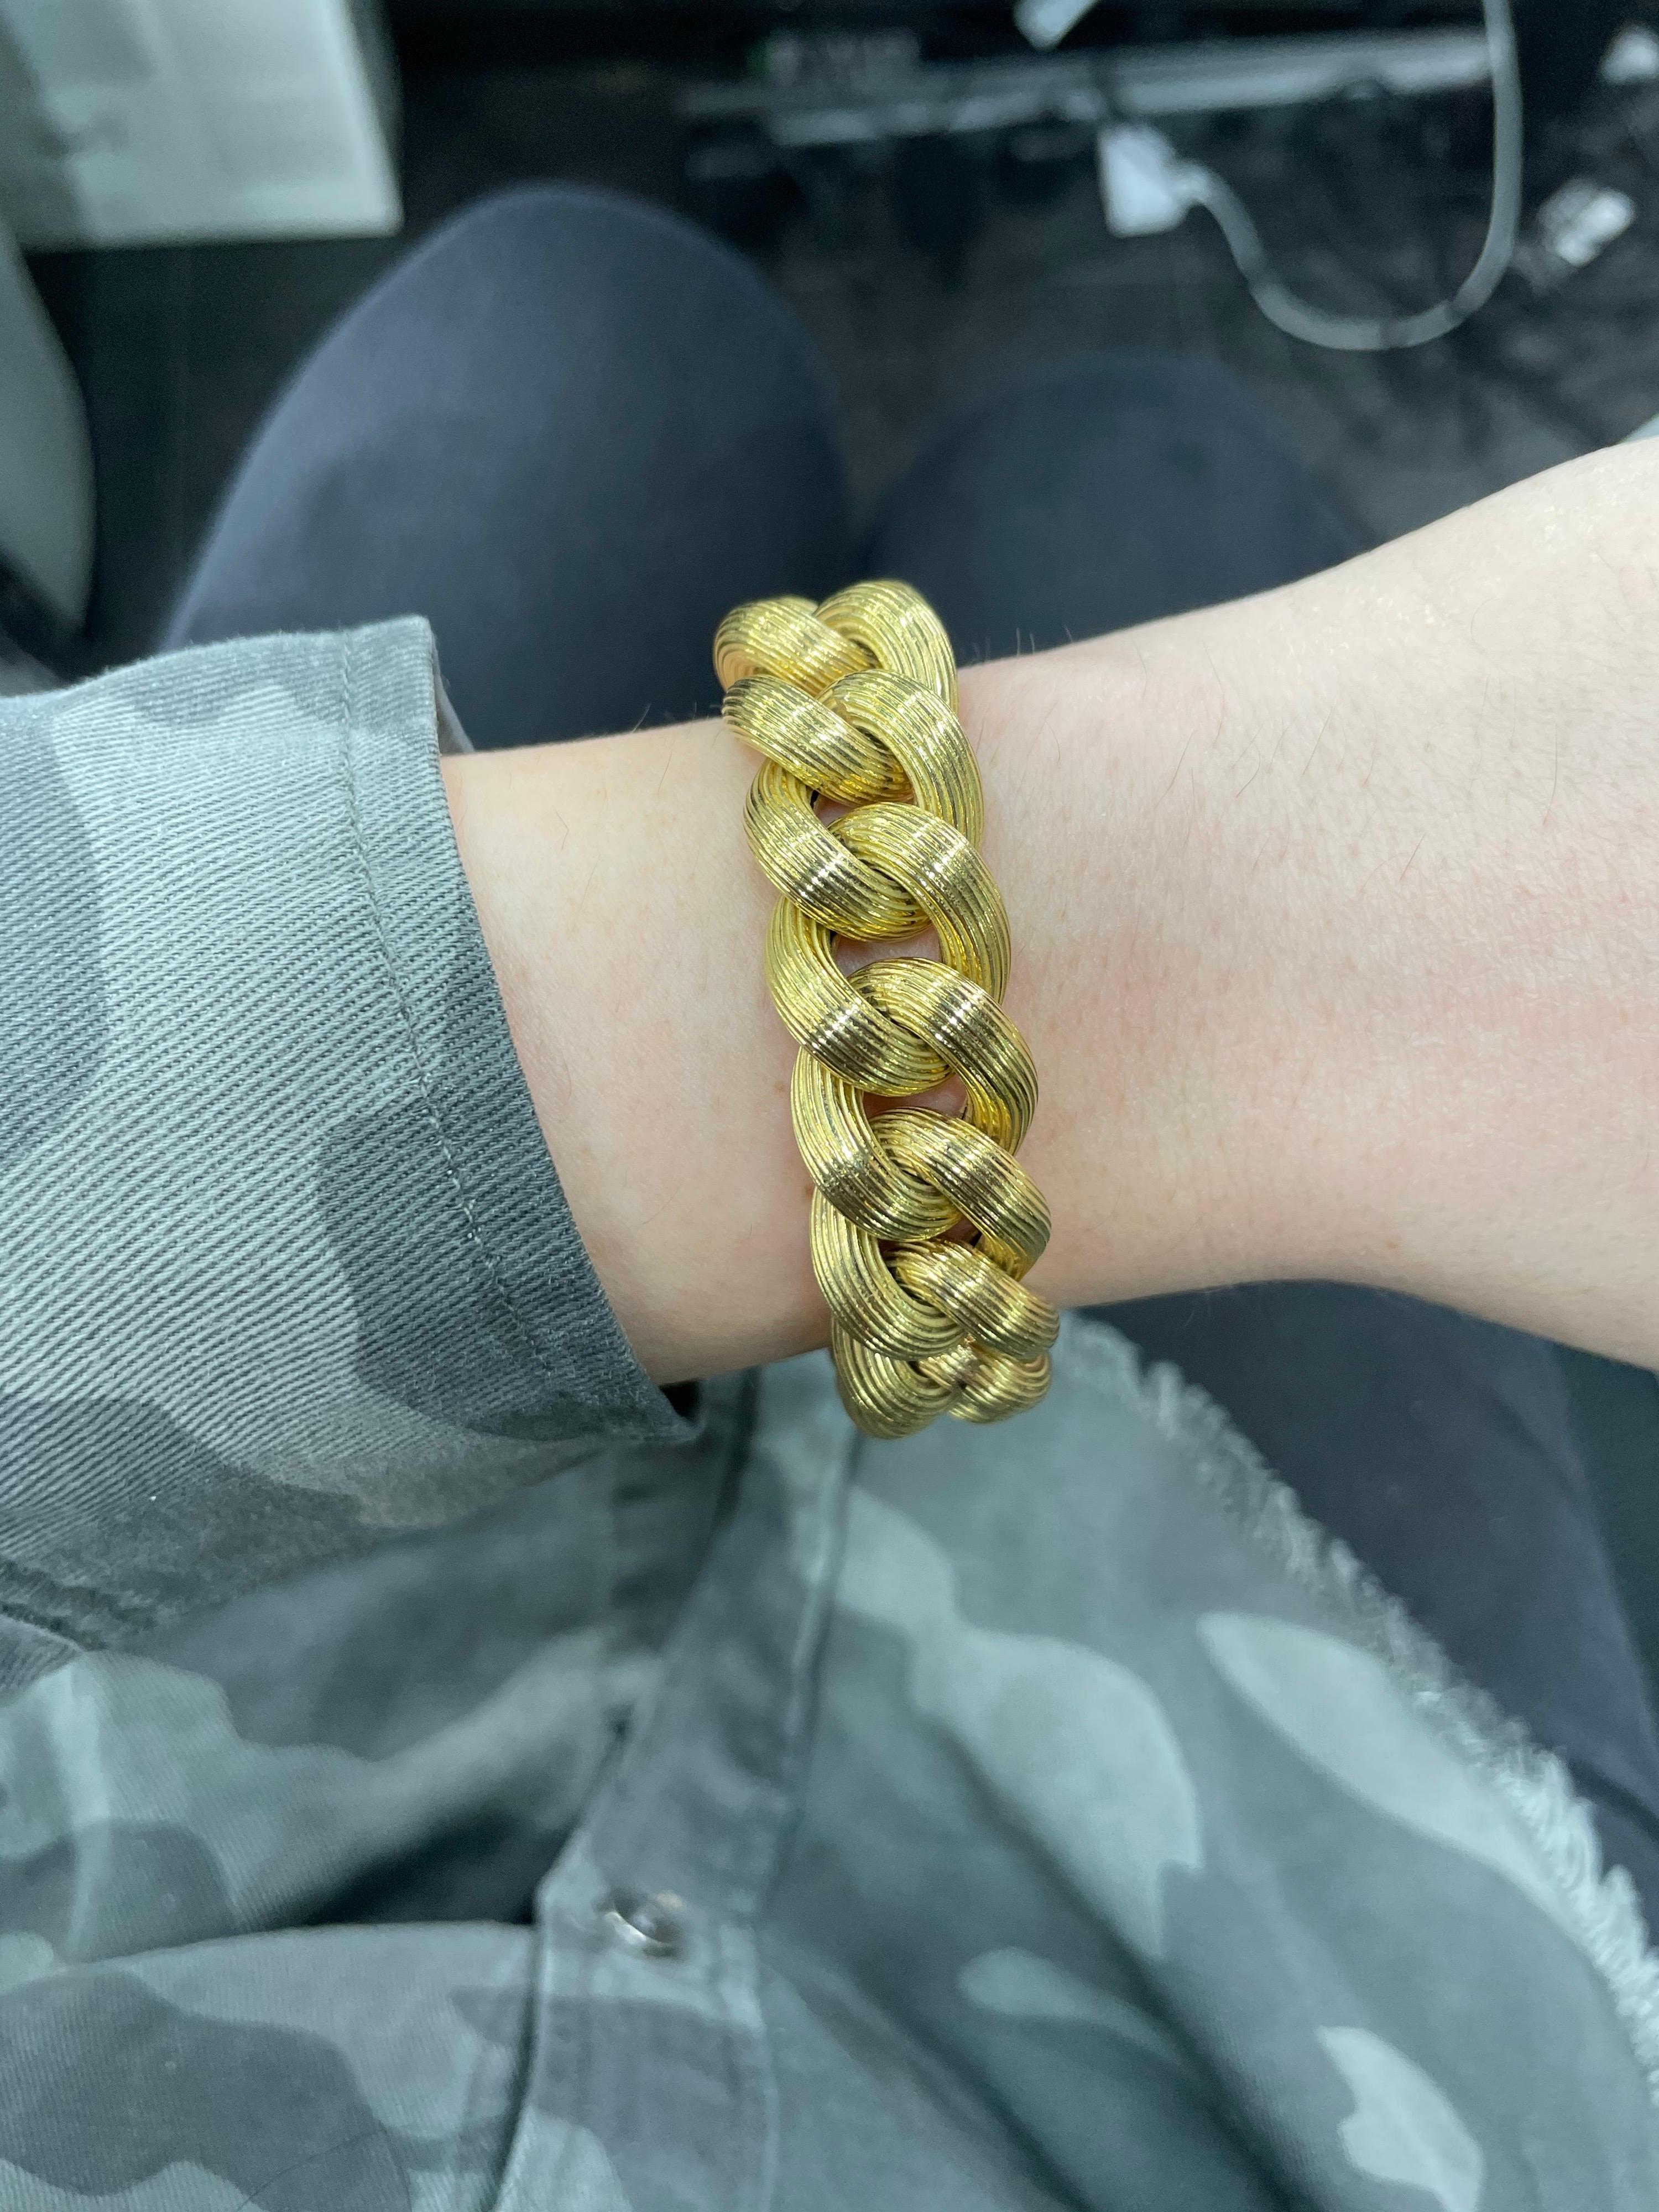 18 Karat yellow gold bracelet featuring 19 links weighing 61.9 grams. 
Great for stacking!
More link bracelets in stock.